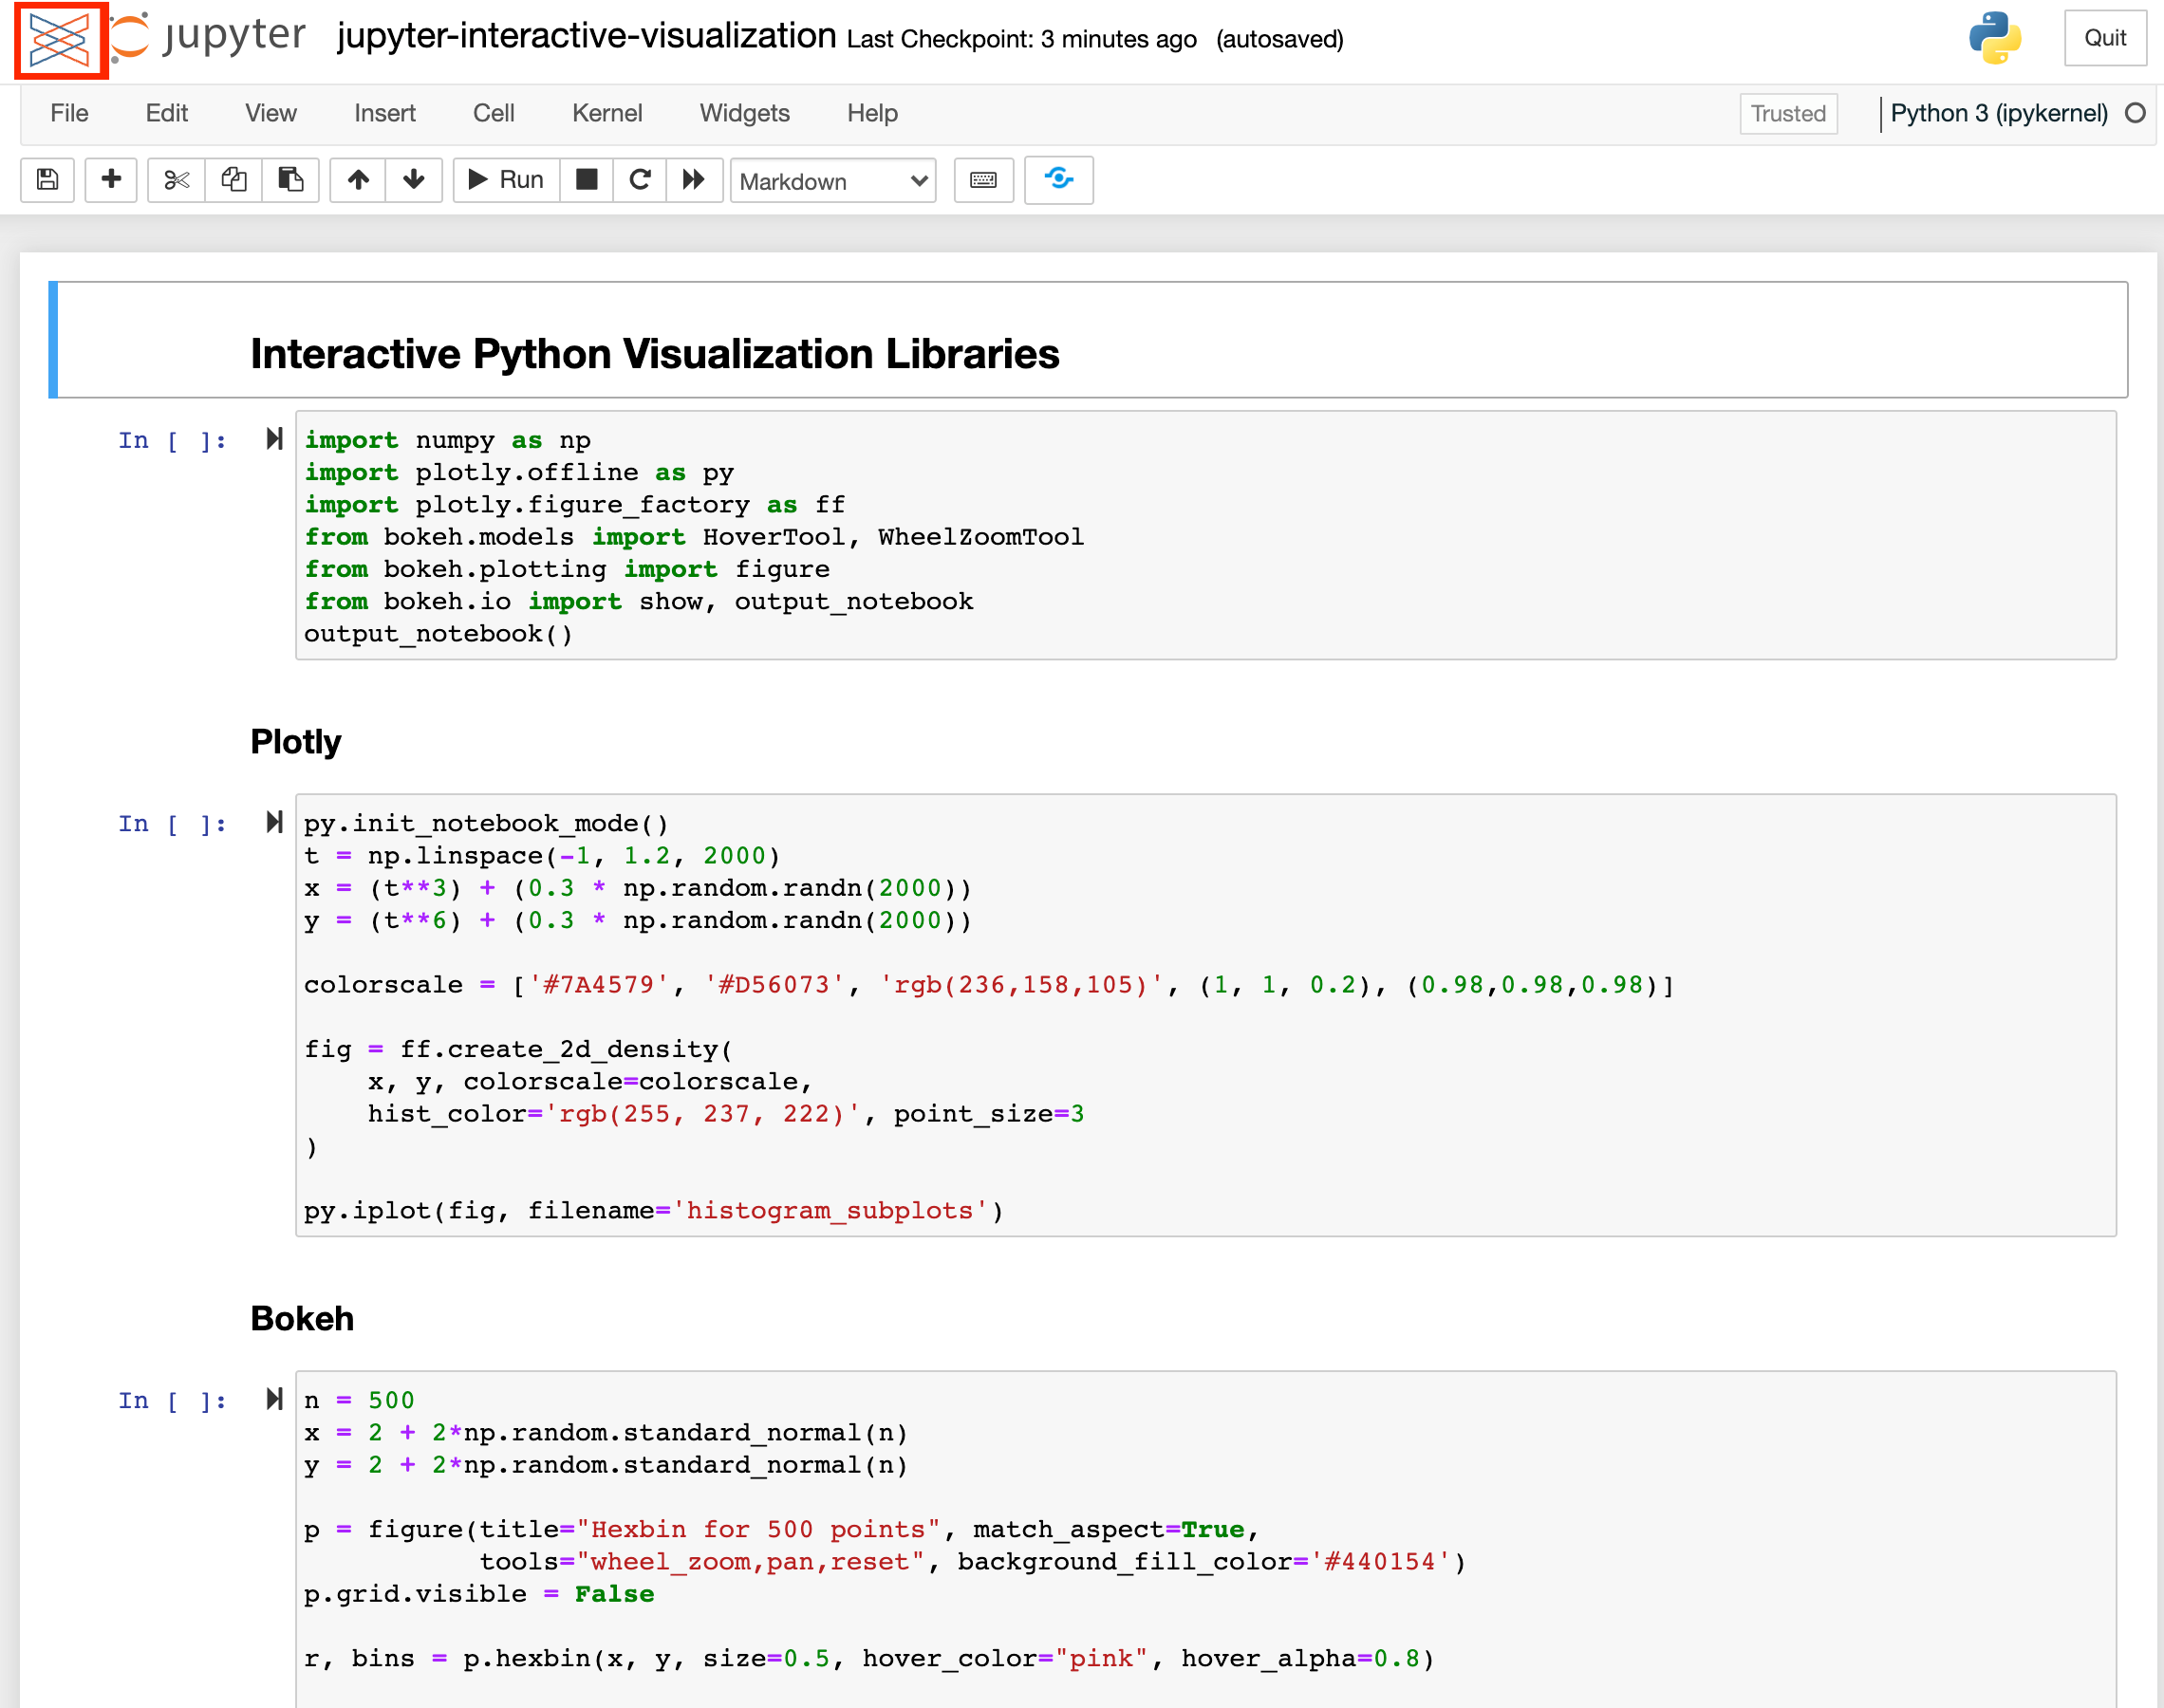 Screenshot of Jupyter Notebook navigating back to the Posit Workbench home page.